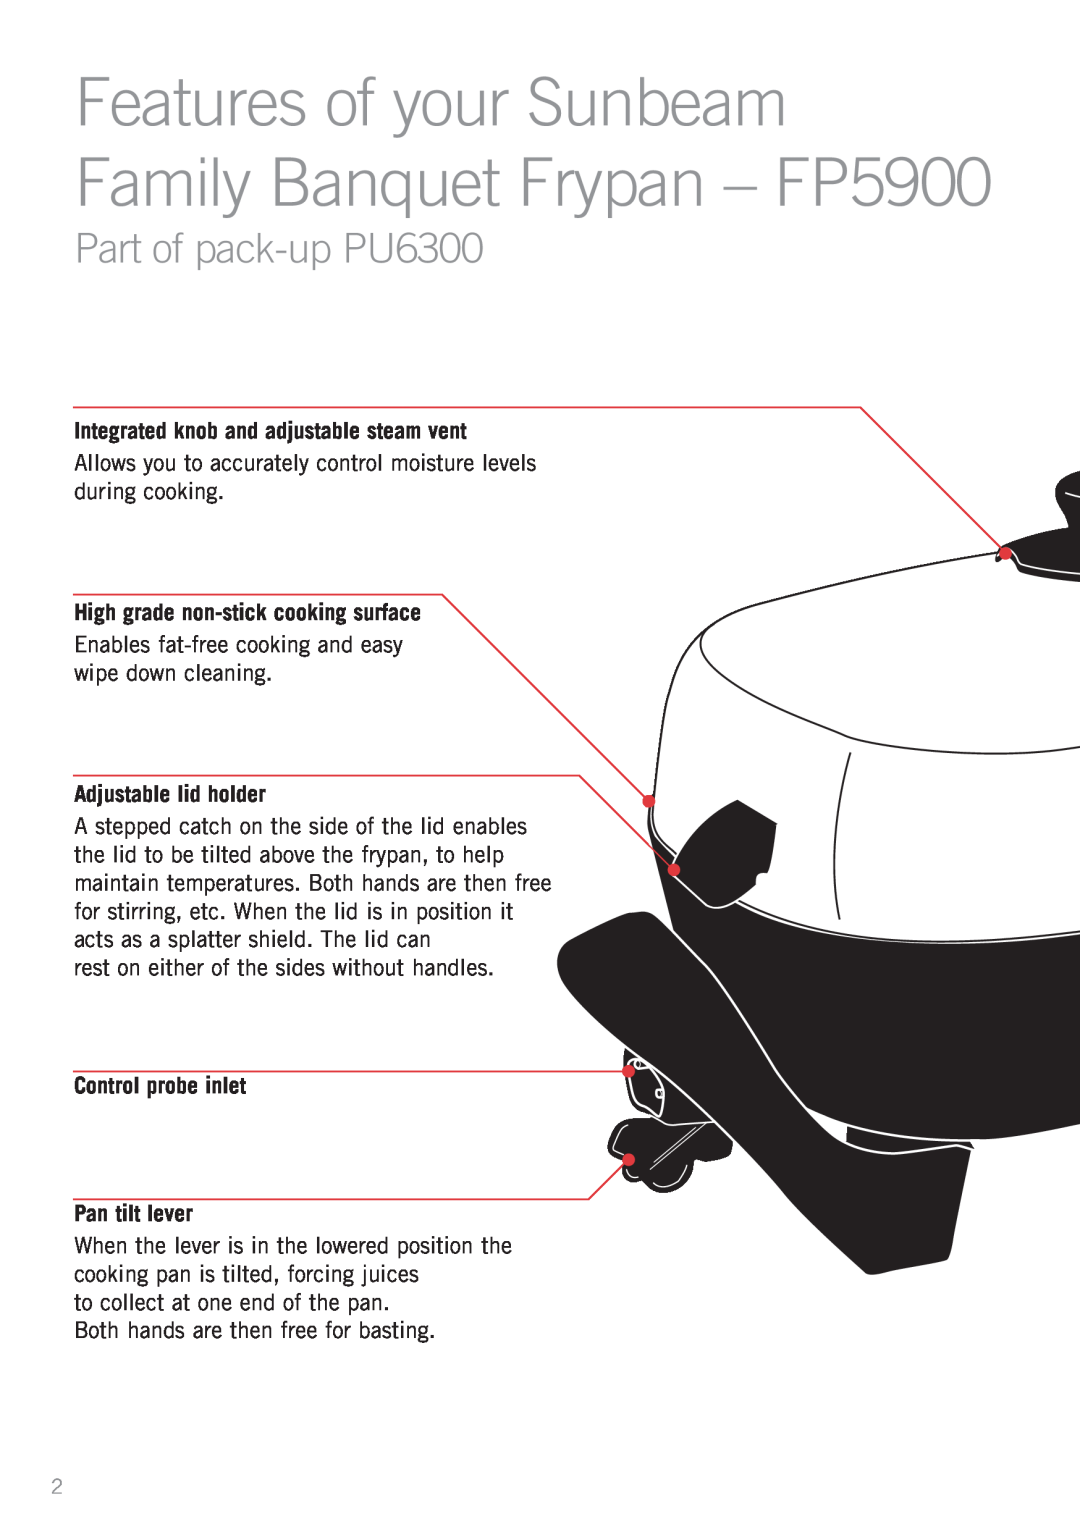 Sunbeam PU5300 manual Part of pack-upPU6300, Integrated knob and adjustable steam vent, High grade non-stickcooking surface 